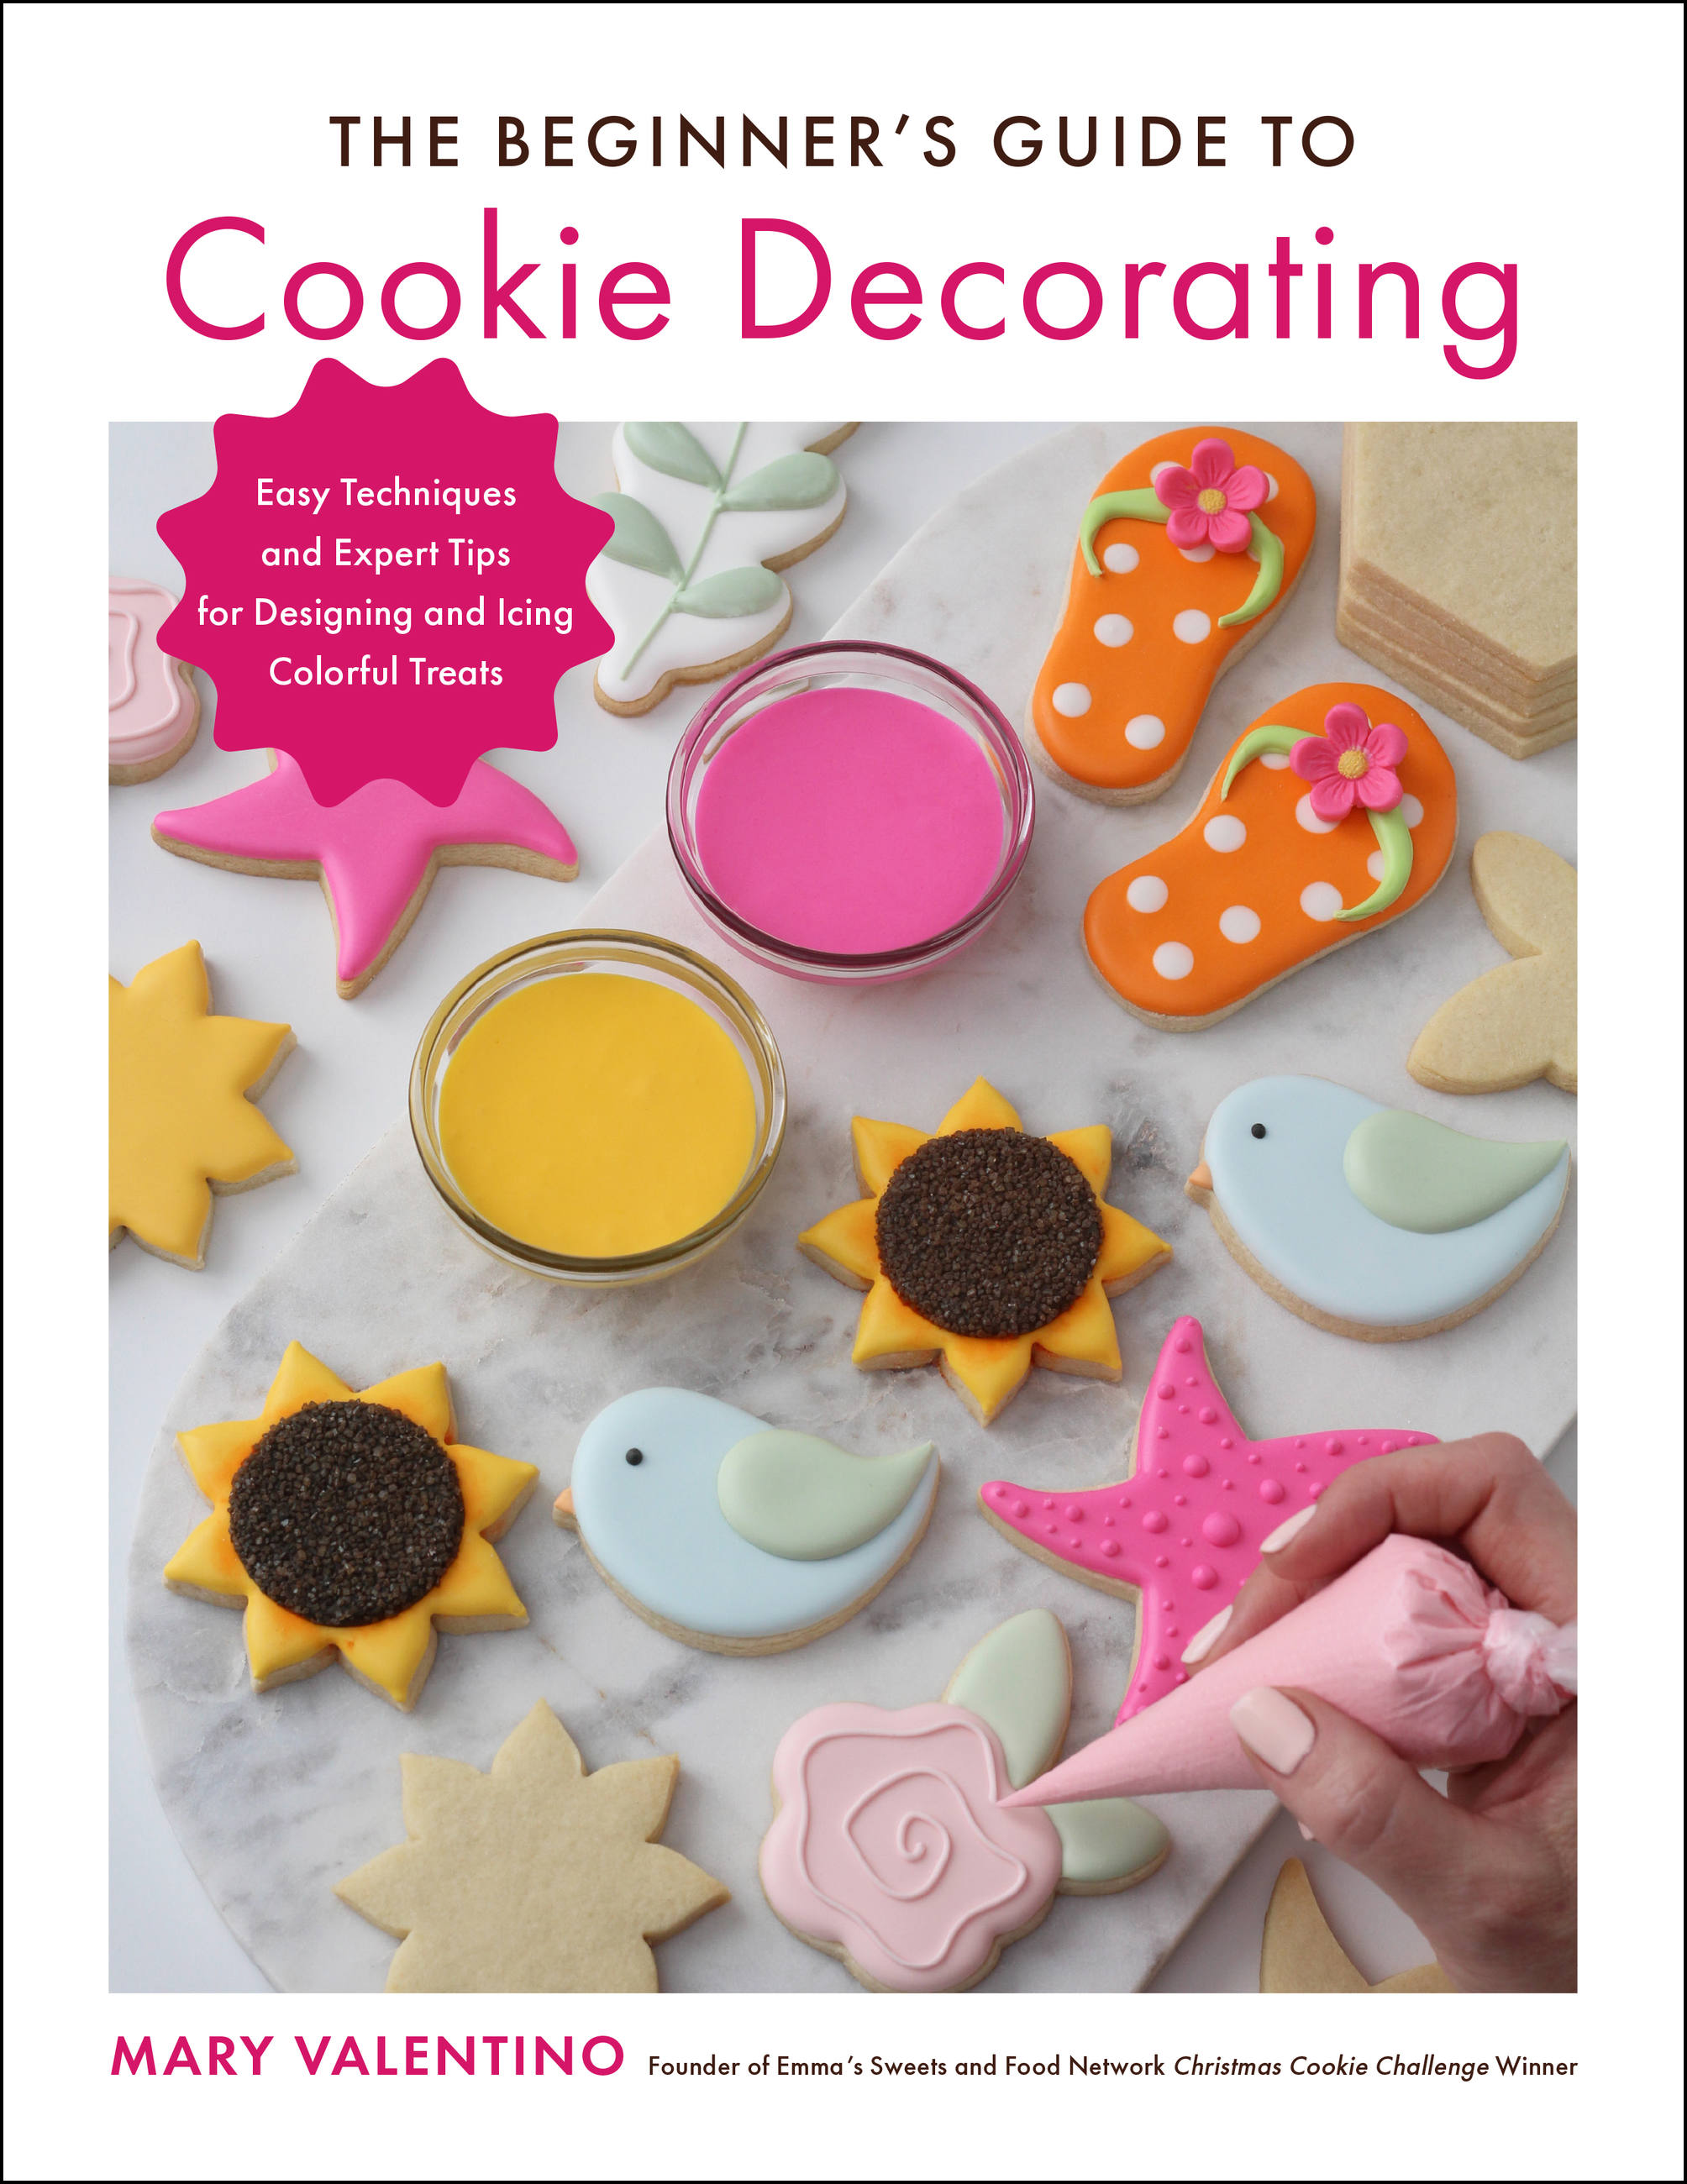 The Beginner's Guide to Cookie Decorating : Easy Techniques and Expert Tips for Designing and Icing Colorful Treats | Cookbook